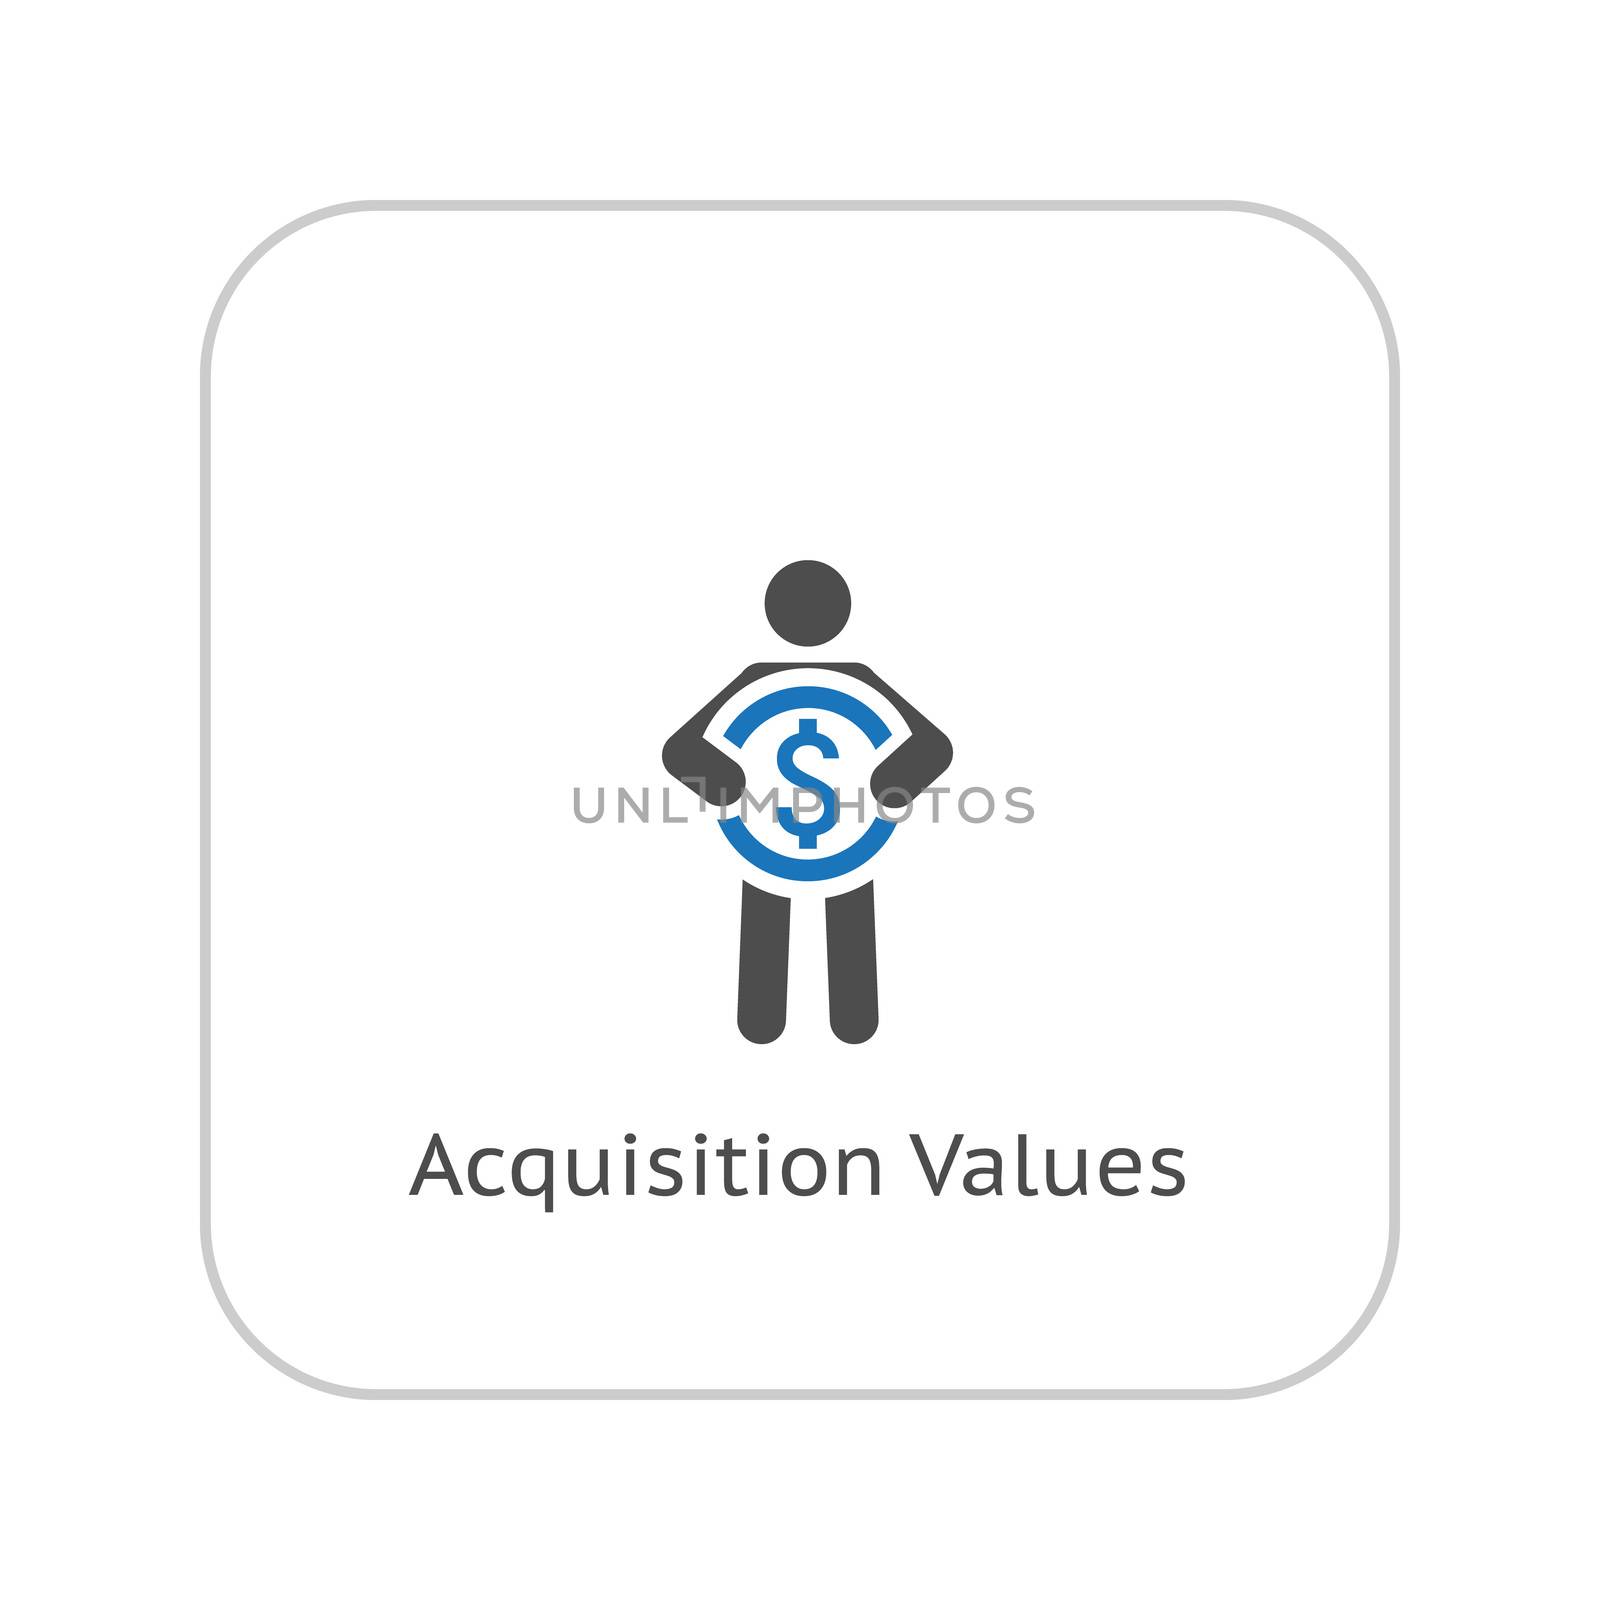 Acquisition Values Icon. Business Concept. Flat Design. Isolated Illustration.